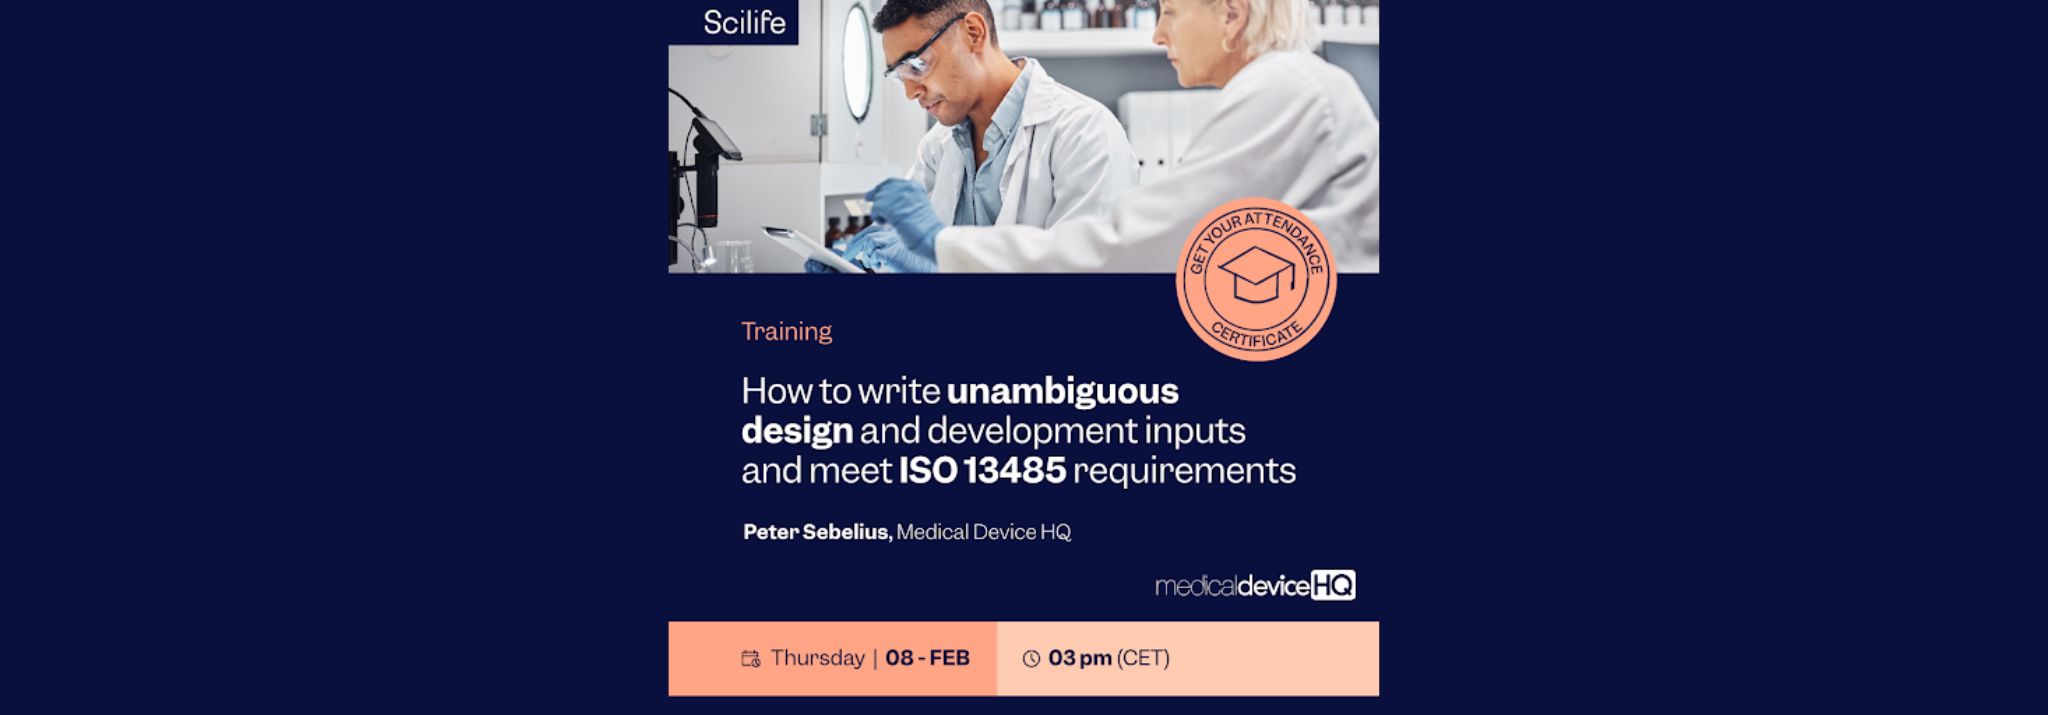 How to write unambiguous design and development inputs and meet ISO 13485 requirements